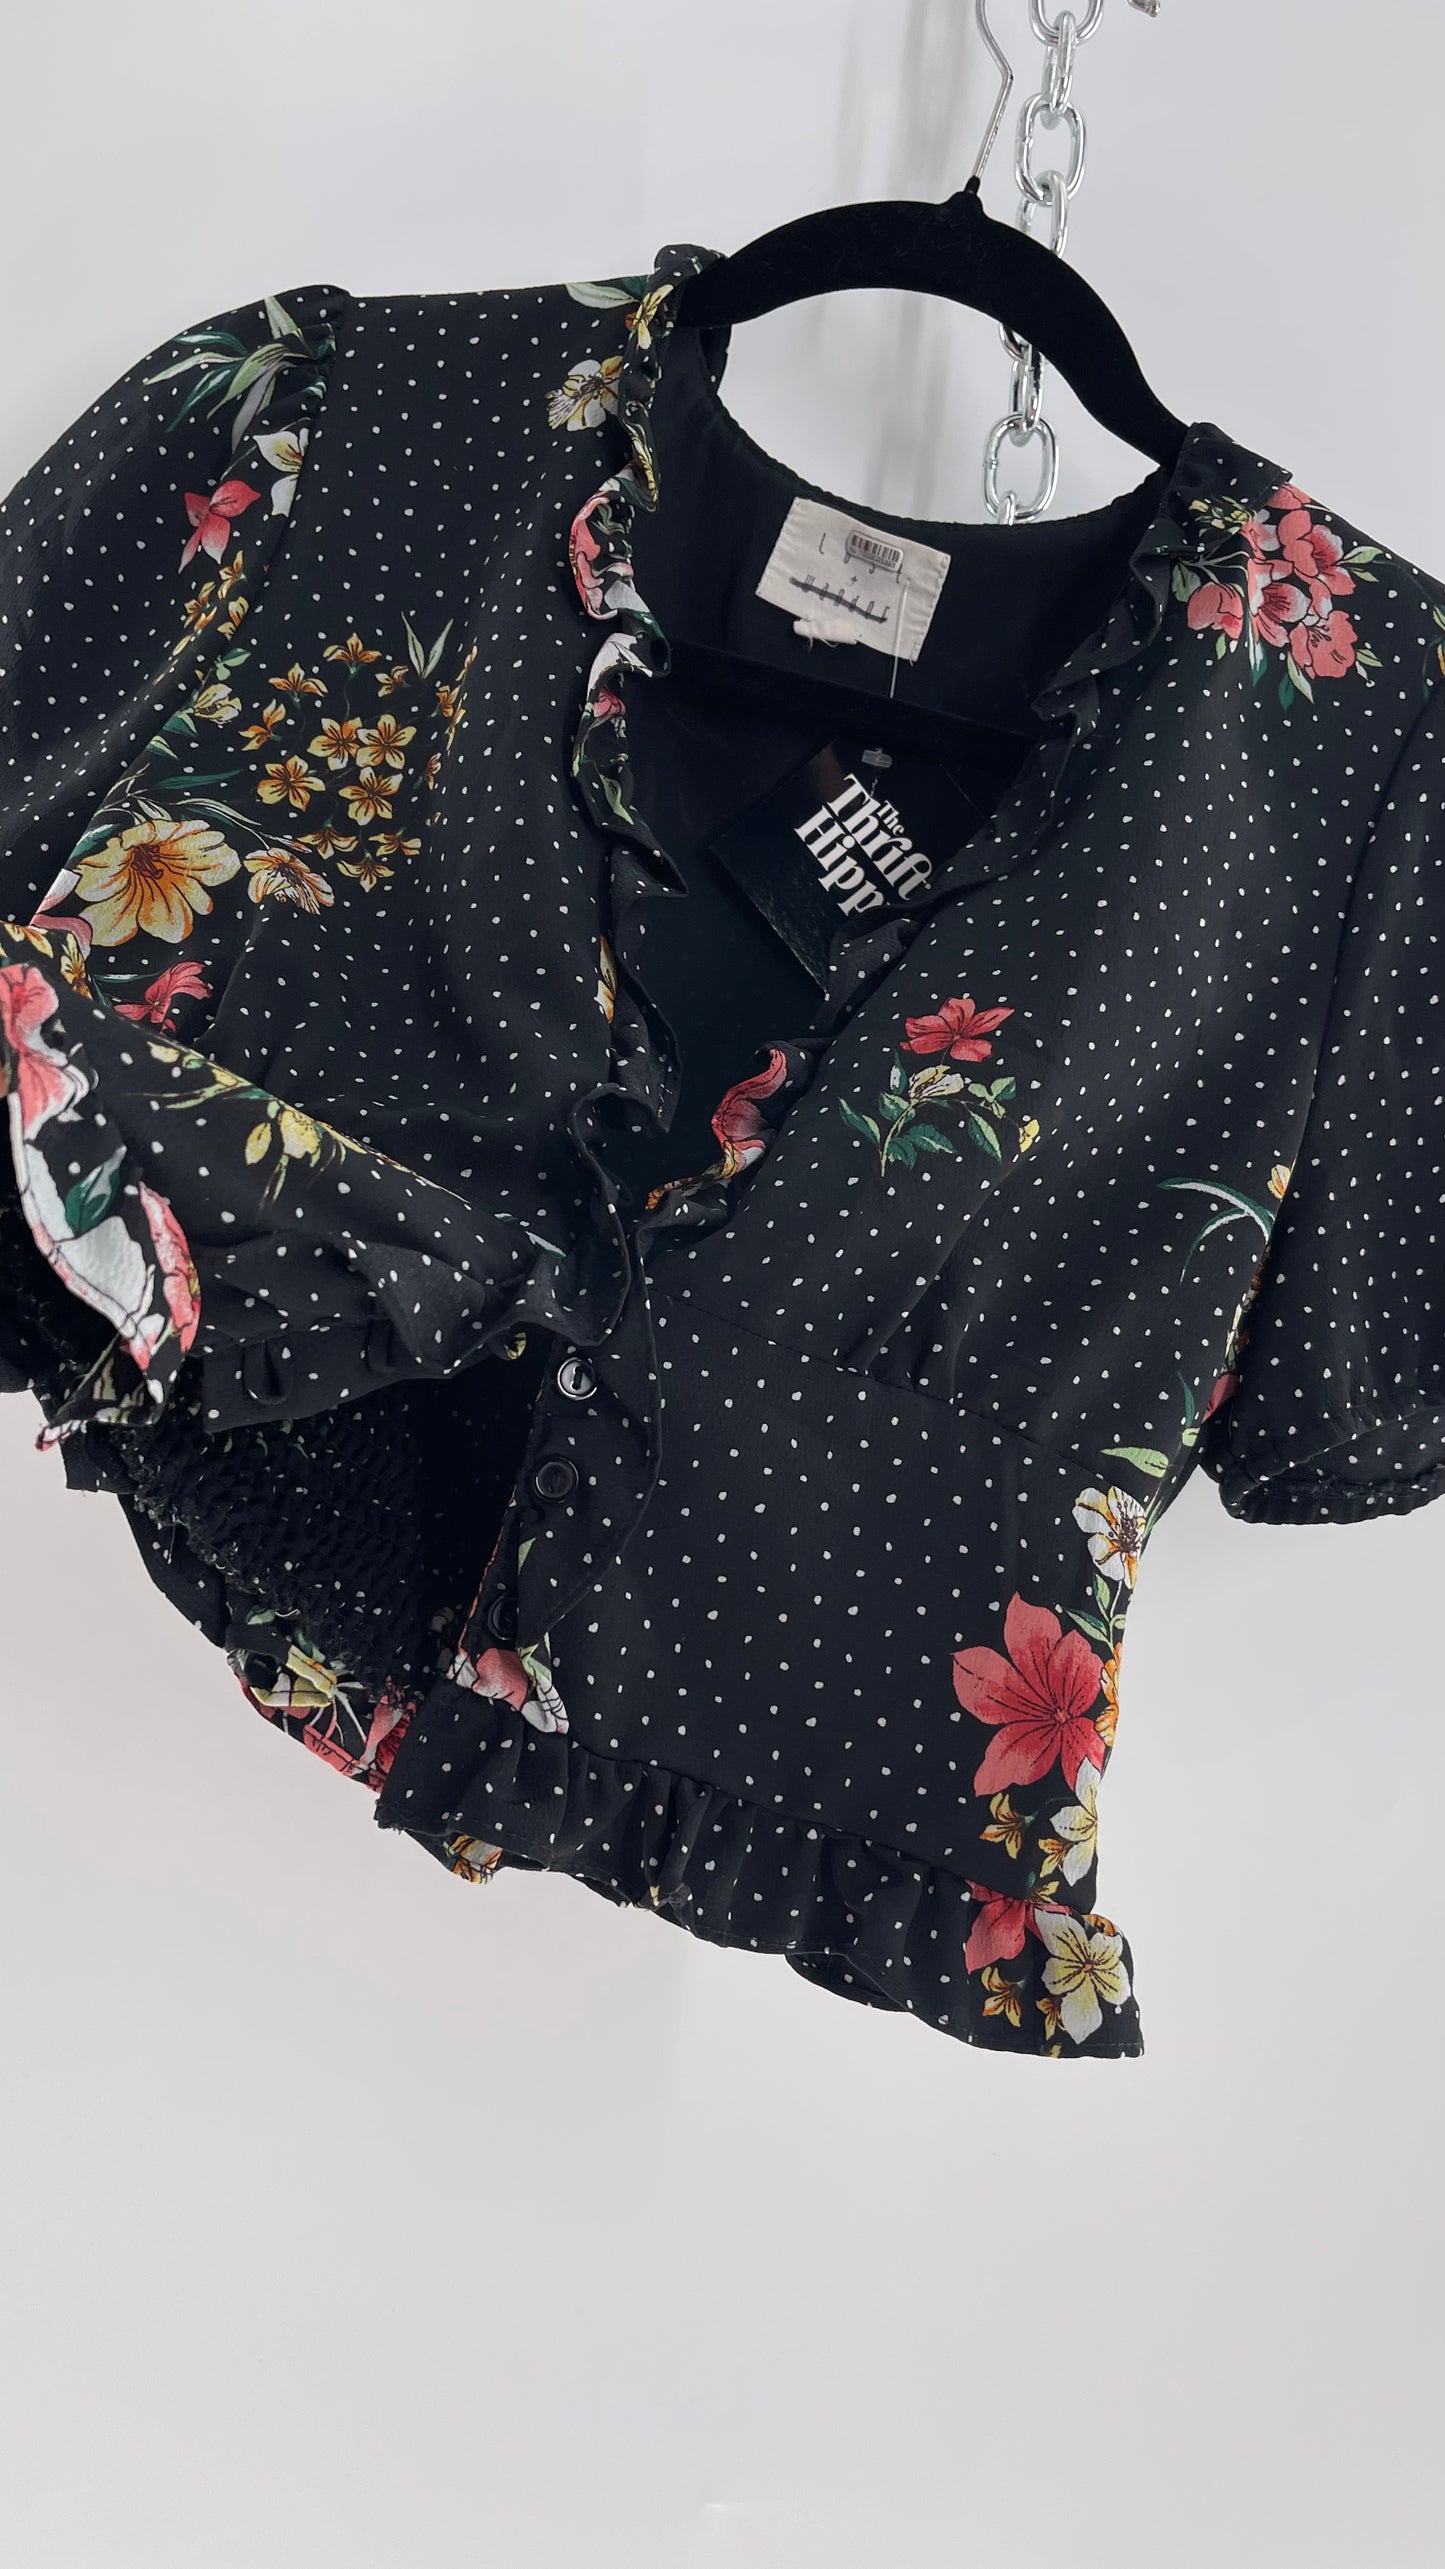 Lost &Wander Polka Dot Florals, Puff Sleeved Button Front (XS)